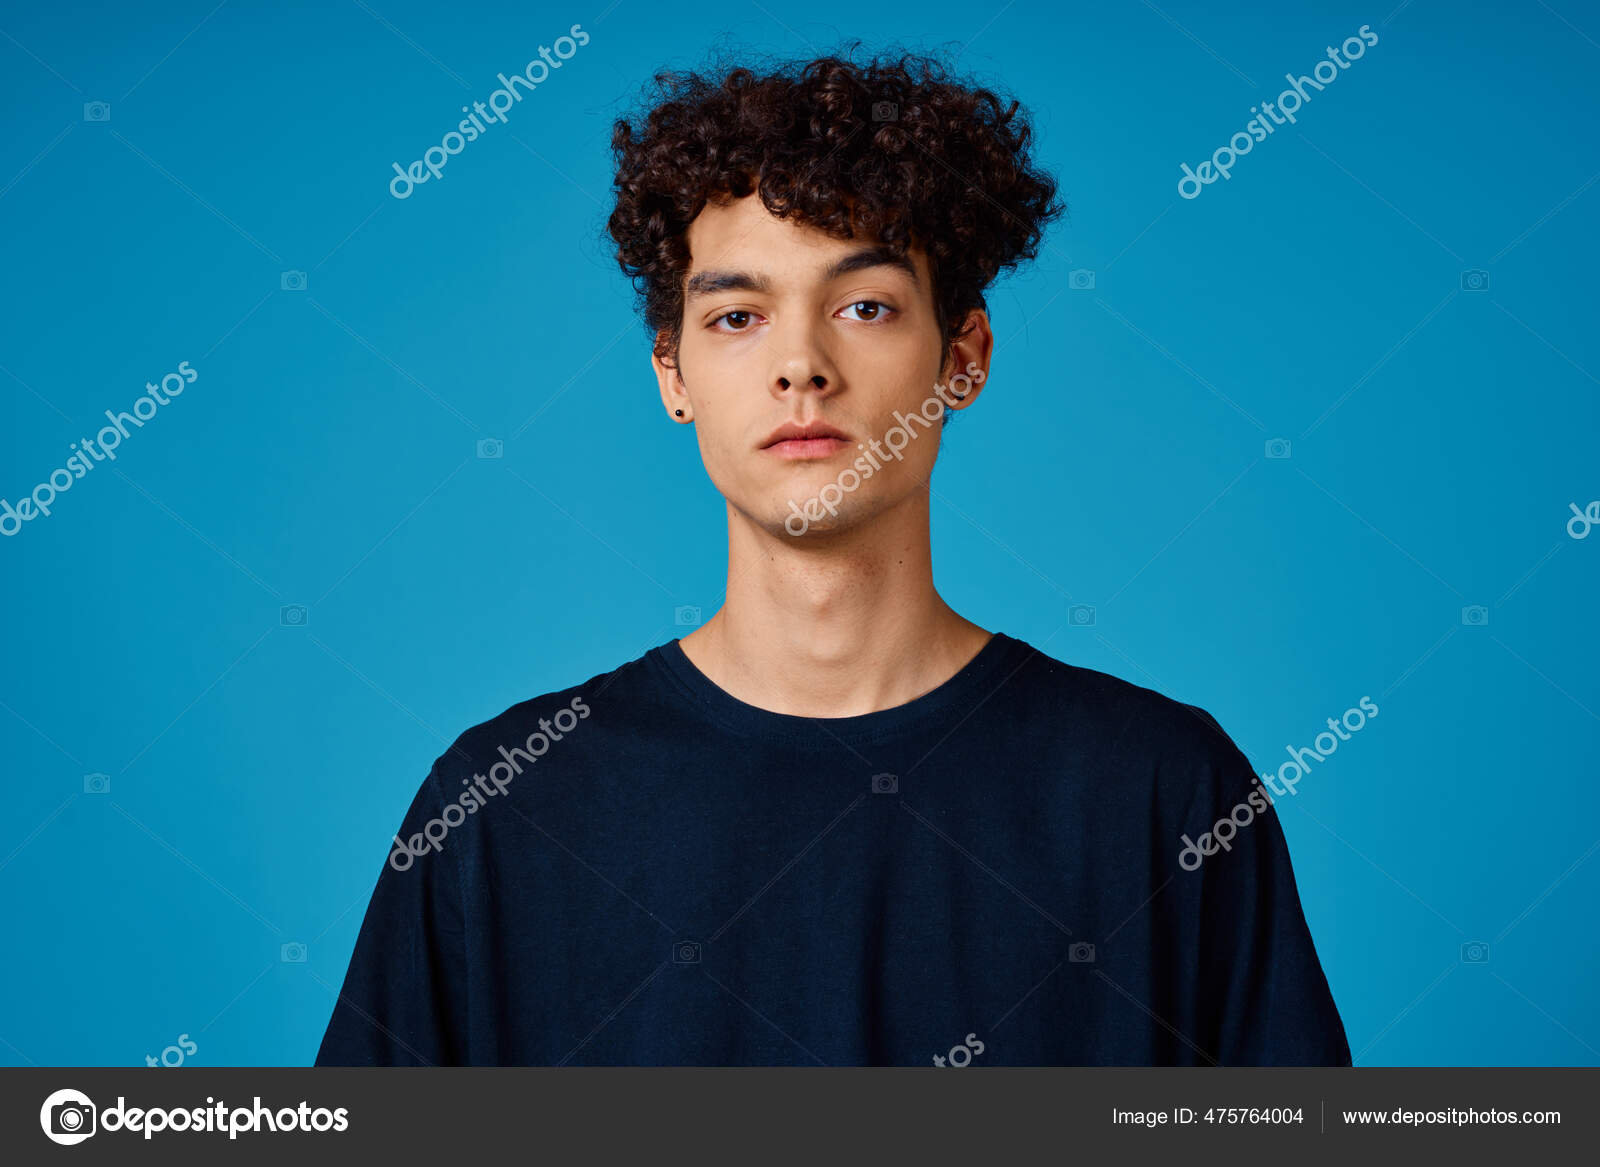 Premium Photo | A man with curly hair and a blue cross on his head